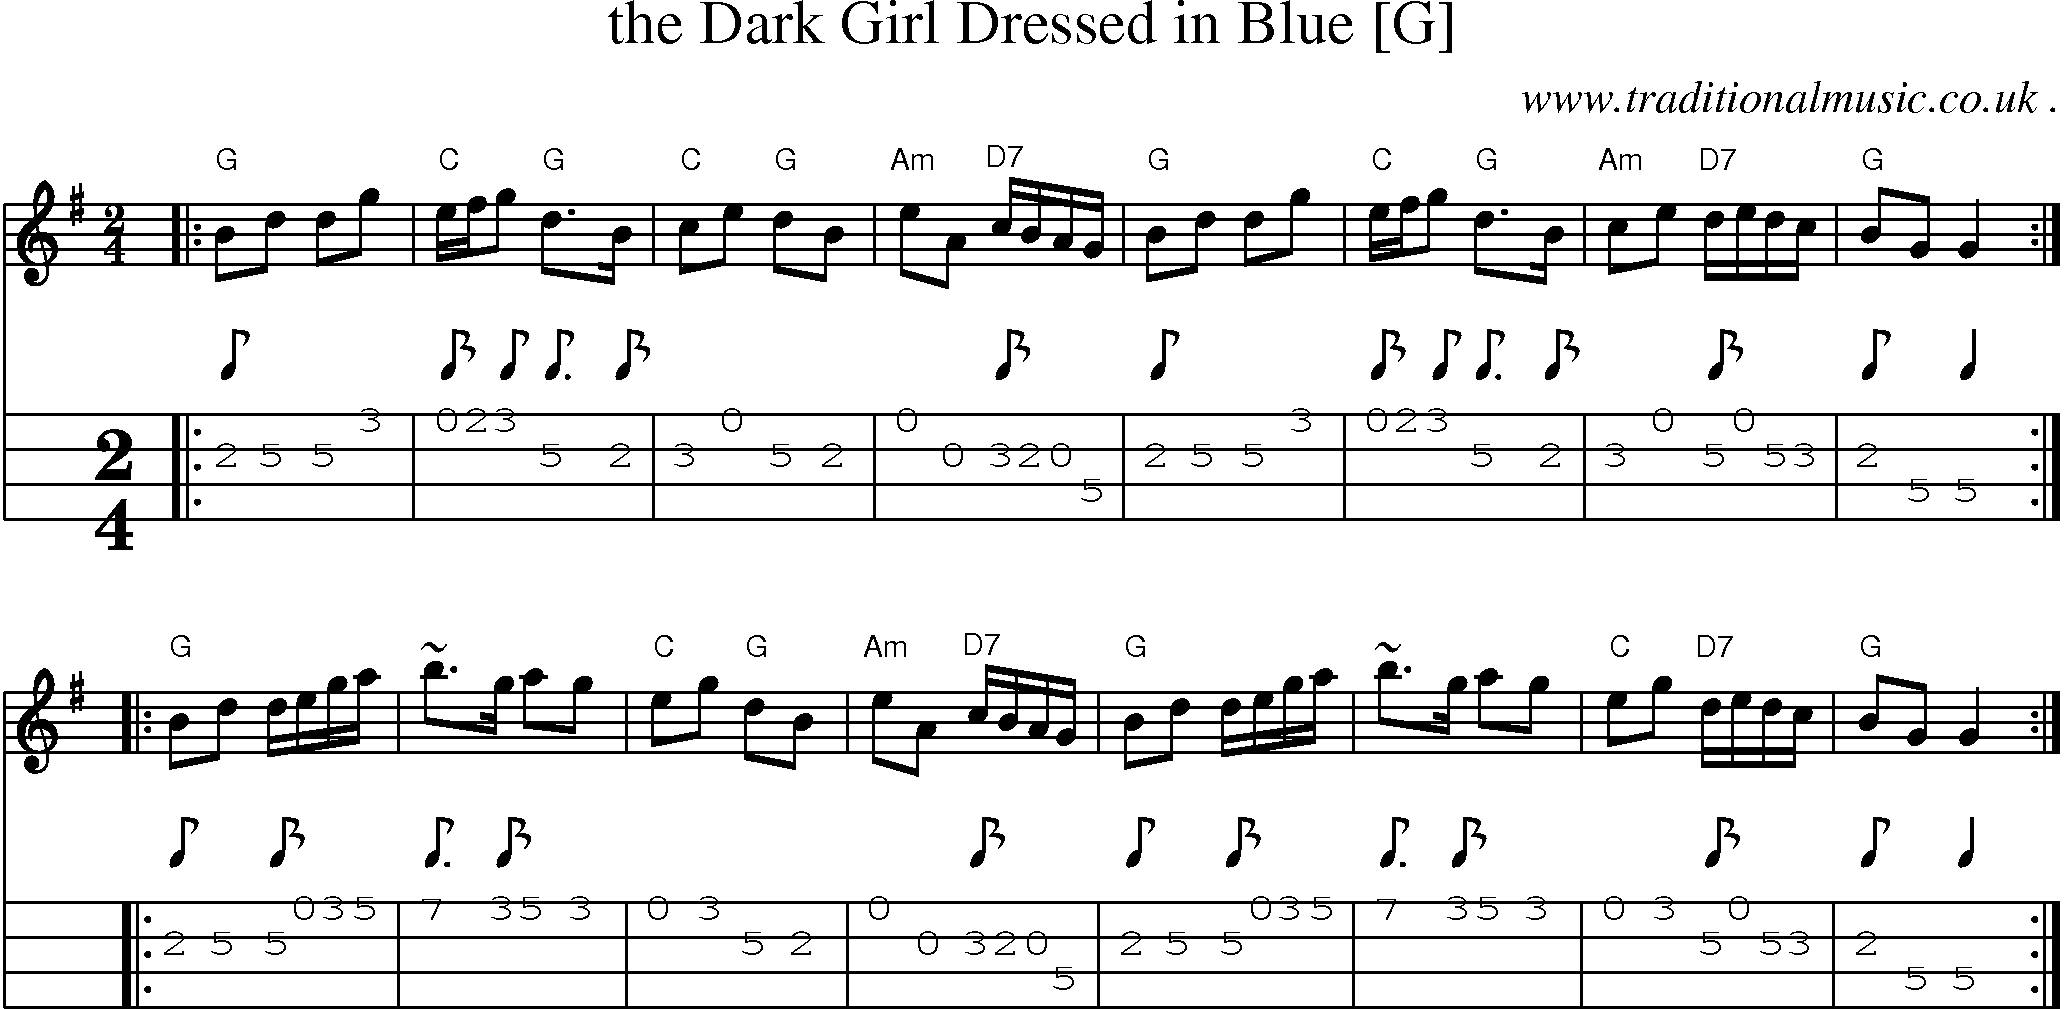 Sheet-music  score, Chords and Mandolin Tabs for The Dark Girl Dressed In Blue [g]